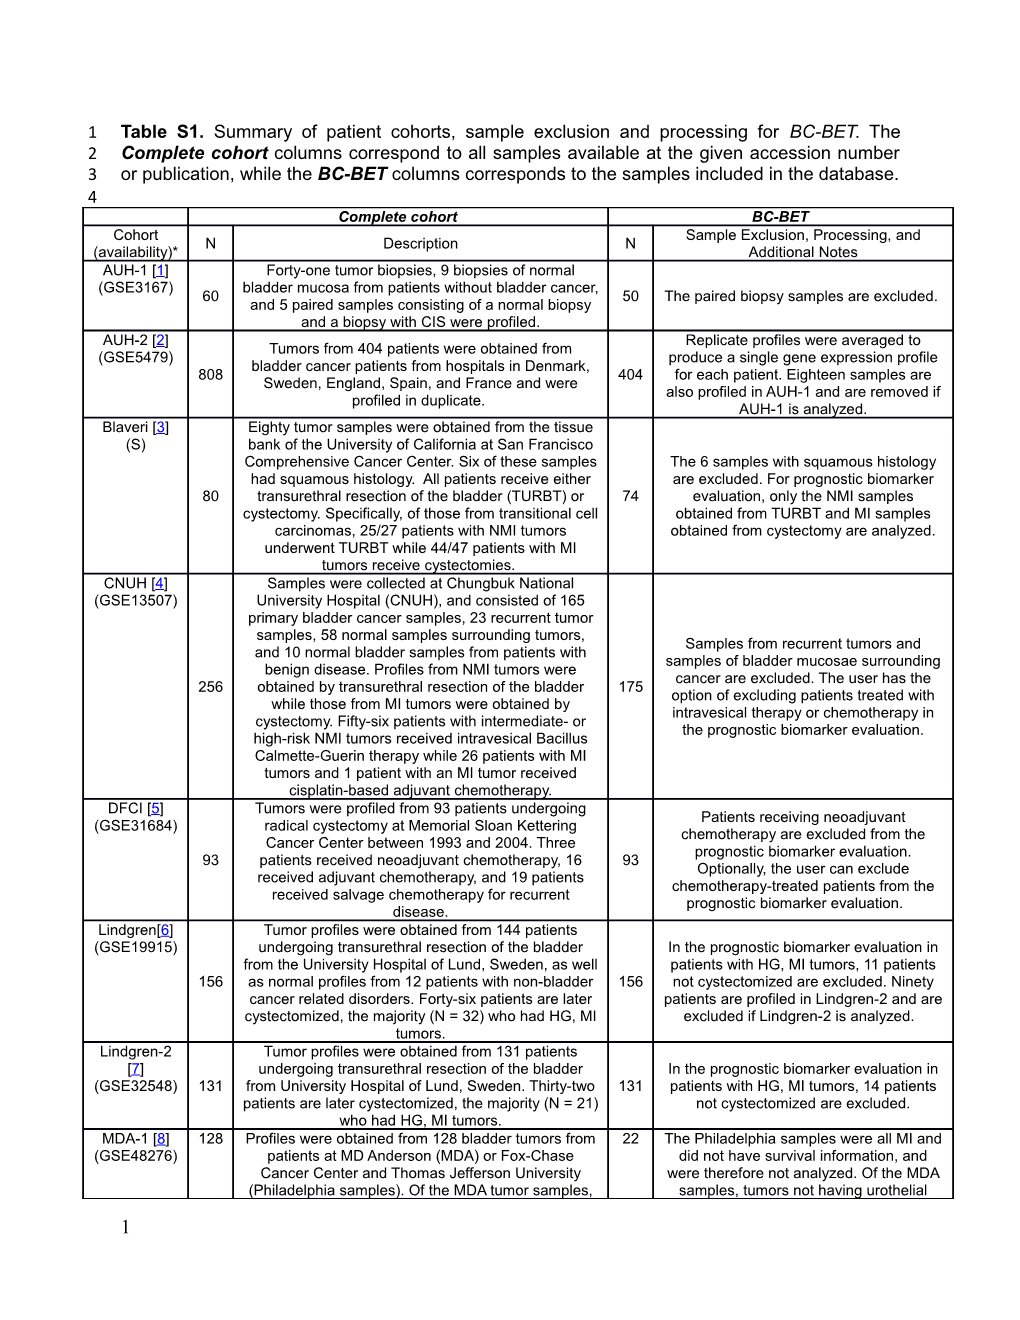 Table S1. Summary of Patient Cohorts, Sample Exclusion and Processing for BC-BET. the Complete